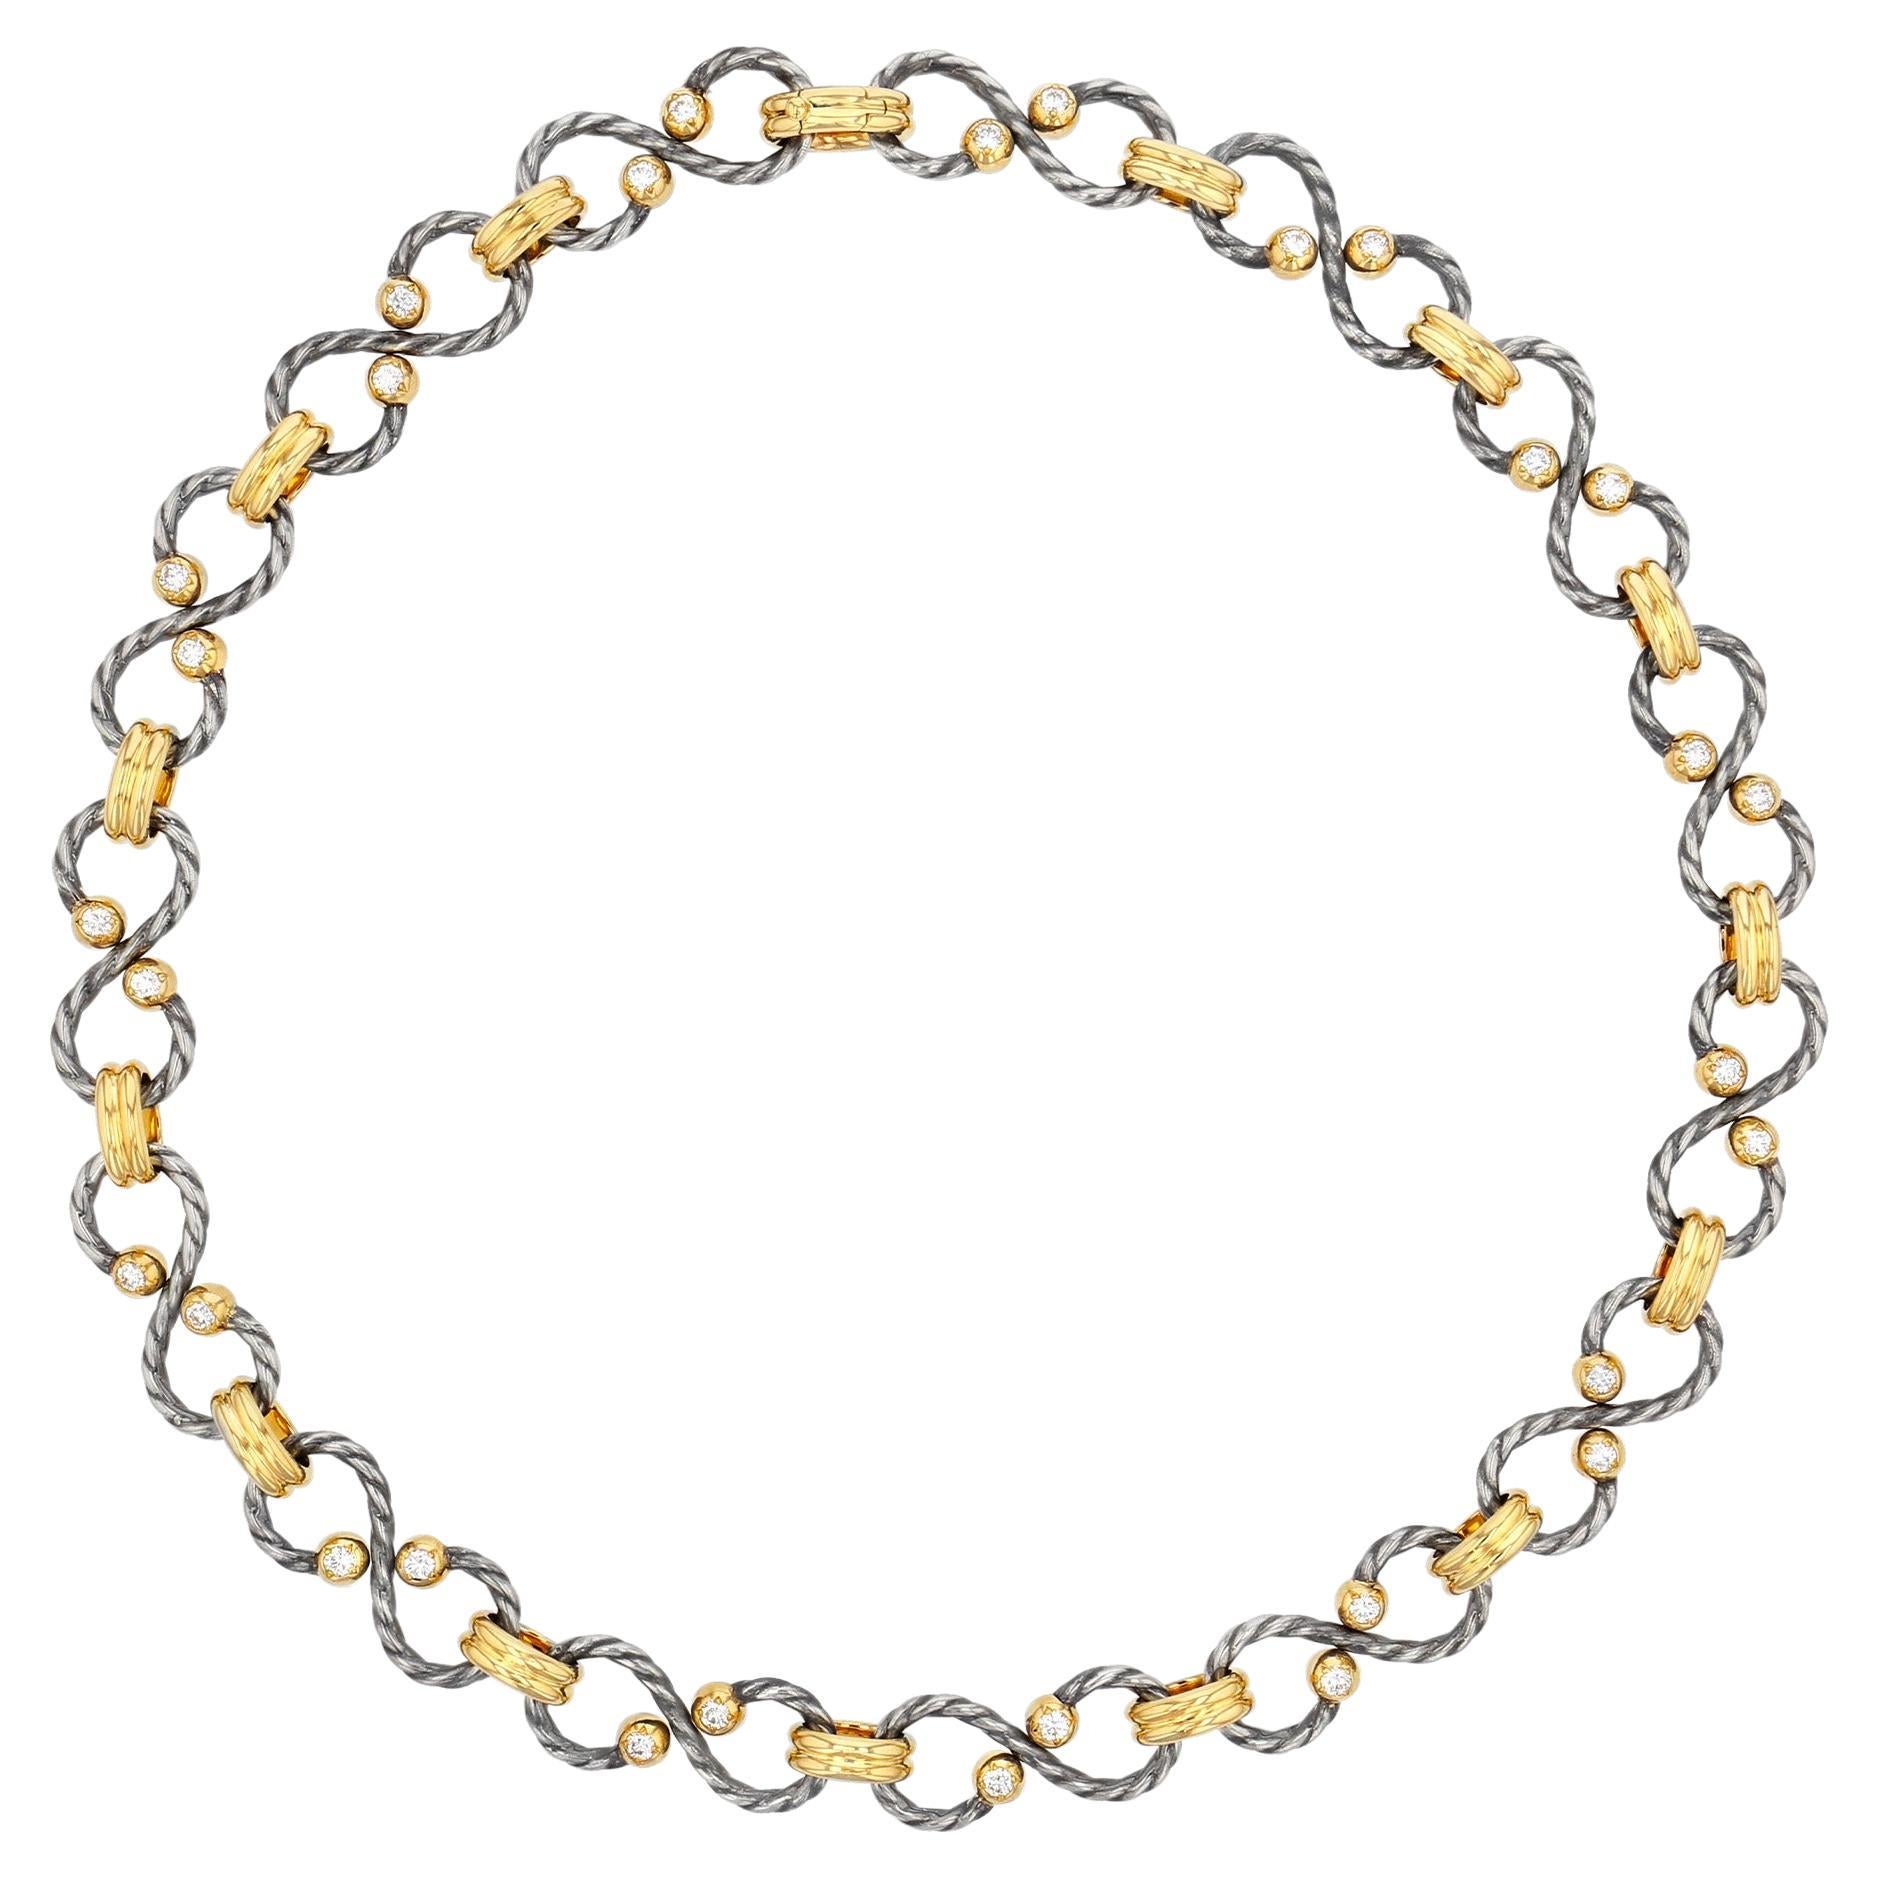 Diamond & Gold Twist Necklace by Elie Top For Sale